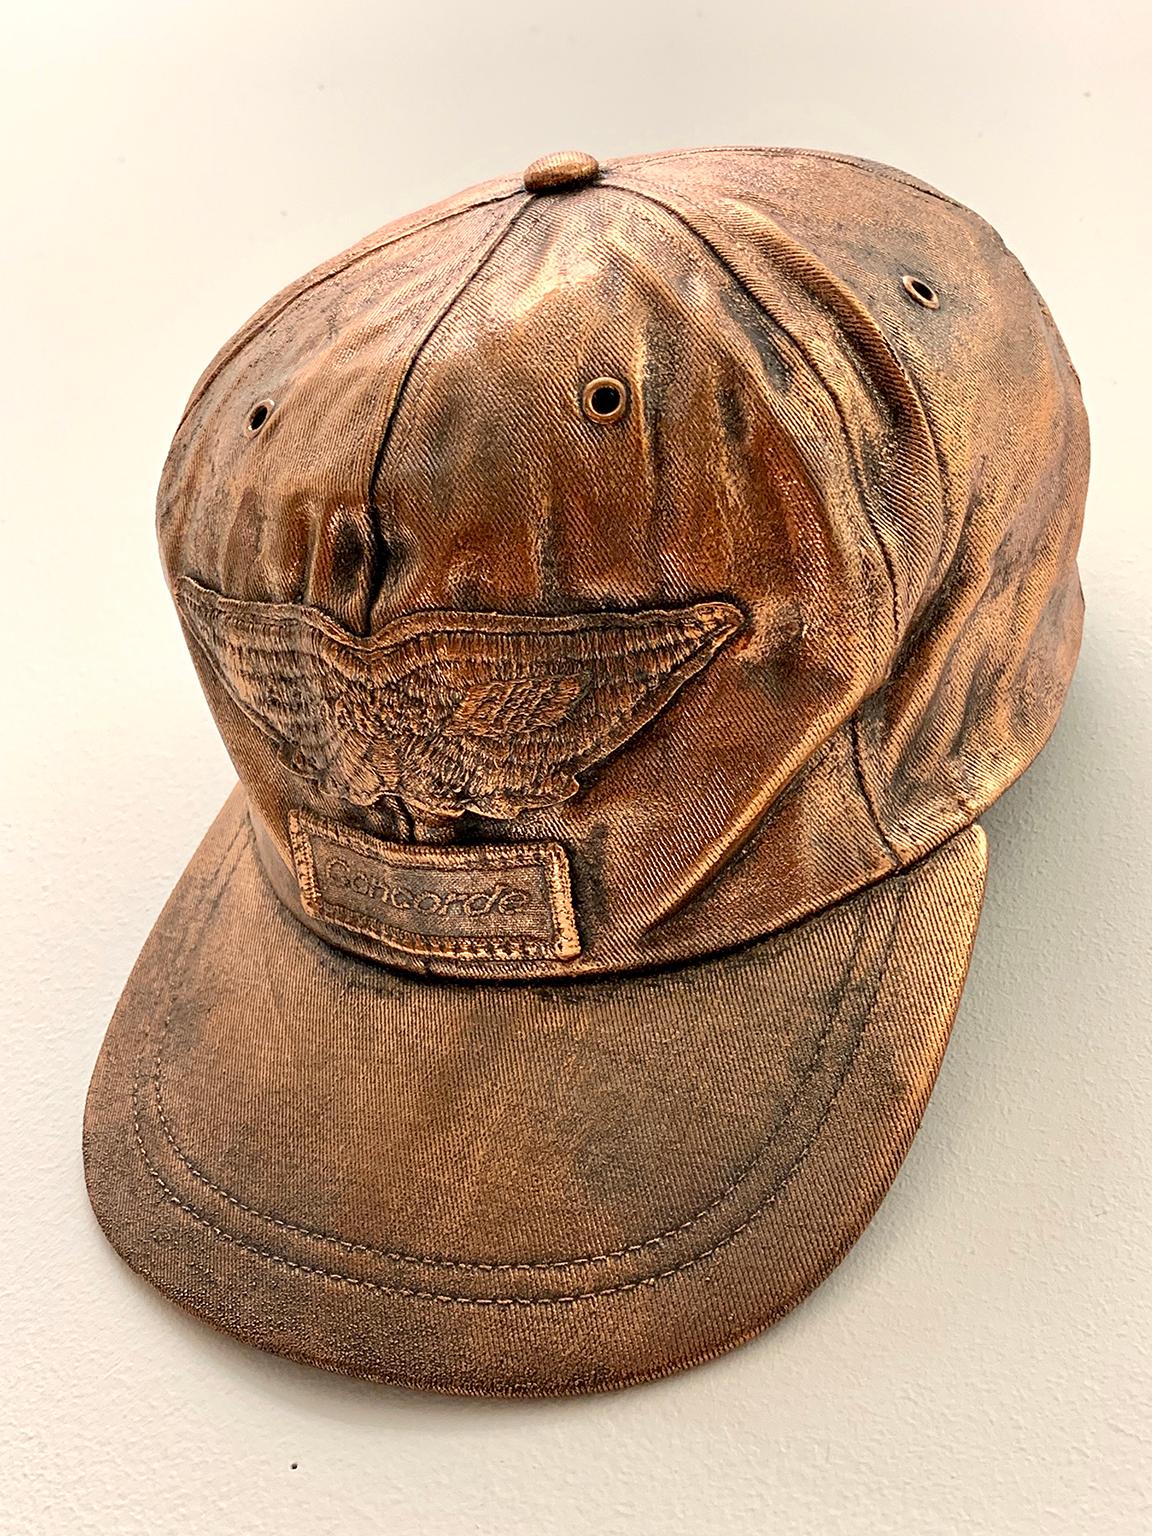 Concorde Cap
Shelter Serra
5.5”x7”x9” 
Electroplated Copper 
2017

The Concorde Cap is one of an ongoing series of copper electroplated hats. Ranging from Superman to Nascar, the artist chooses hats from all walks of life before distilling through